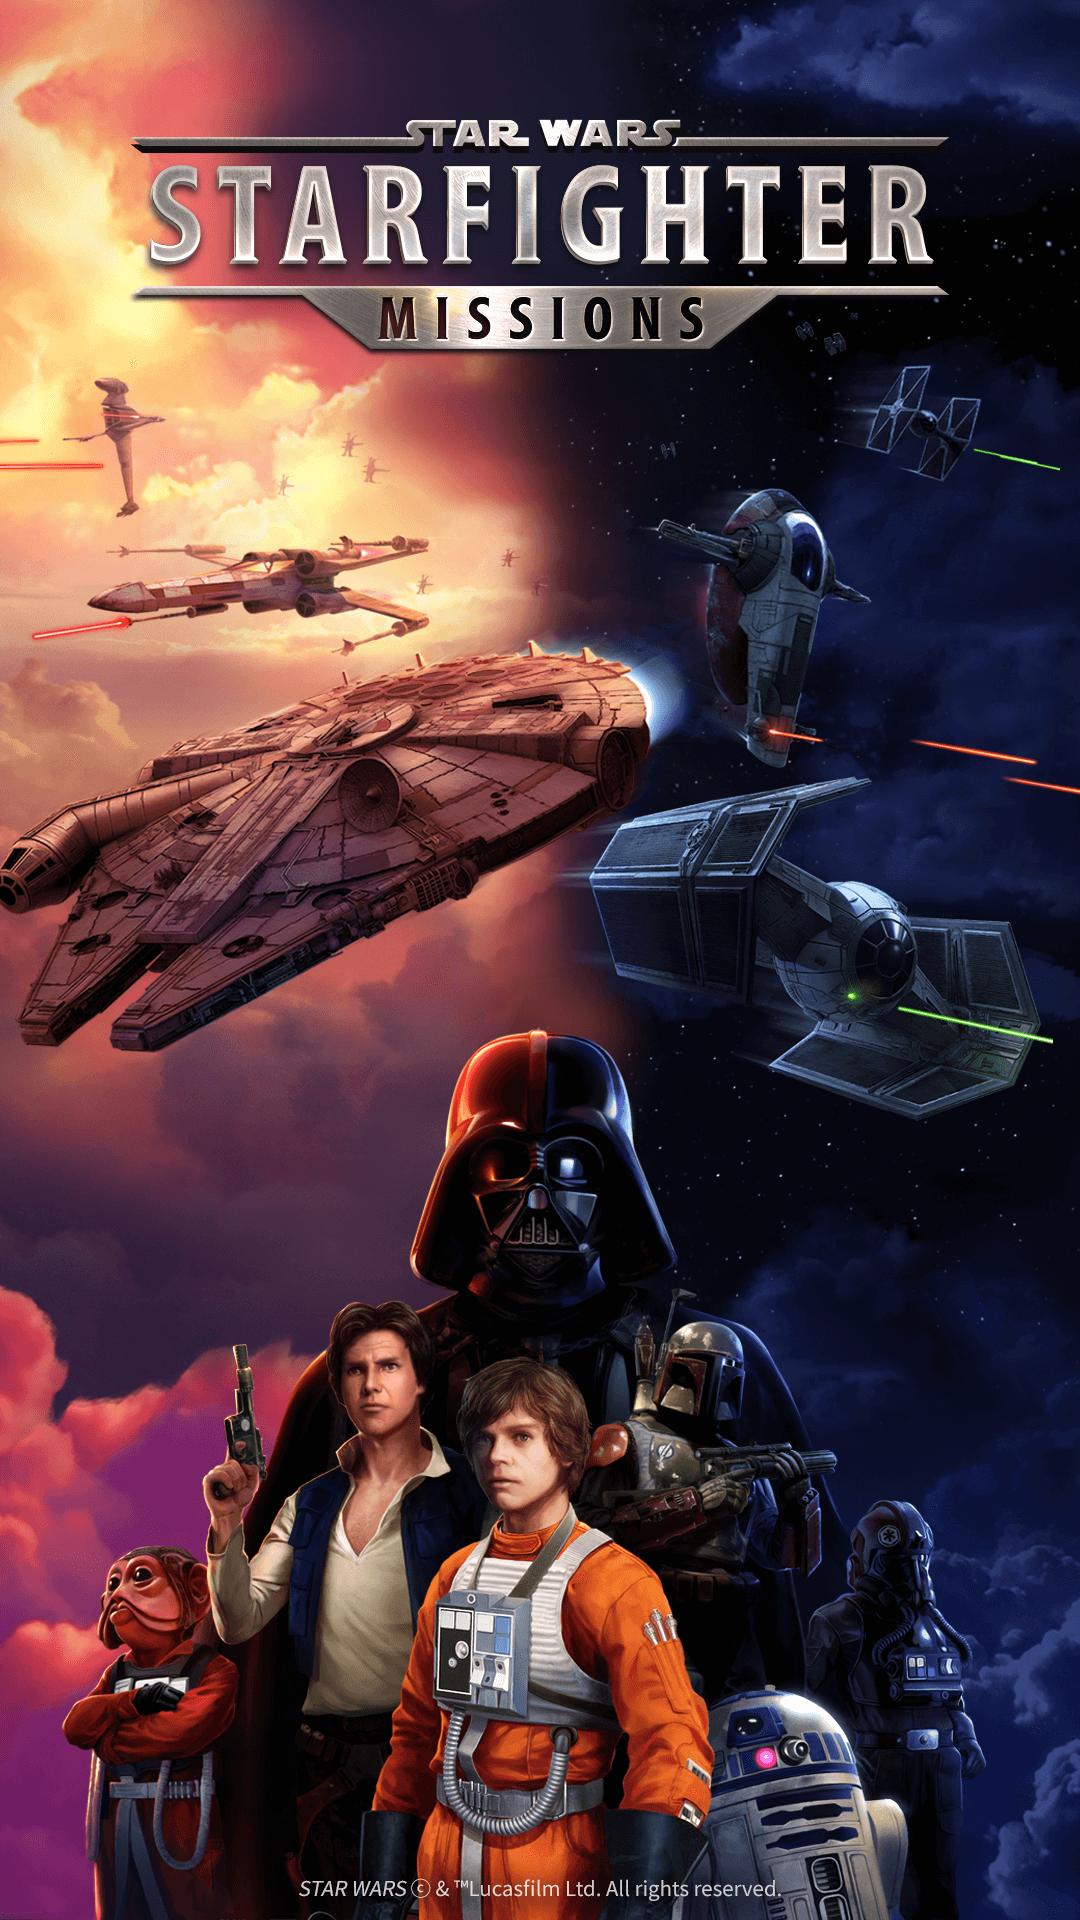 Star Wars™: Starfighter Missions for Android - APK Download | Hình 3